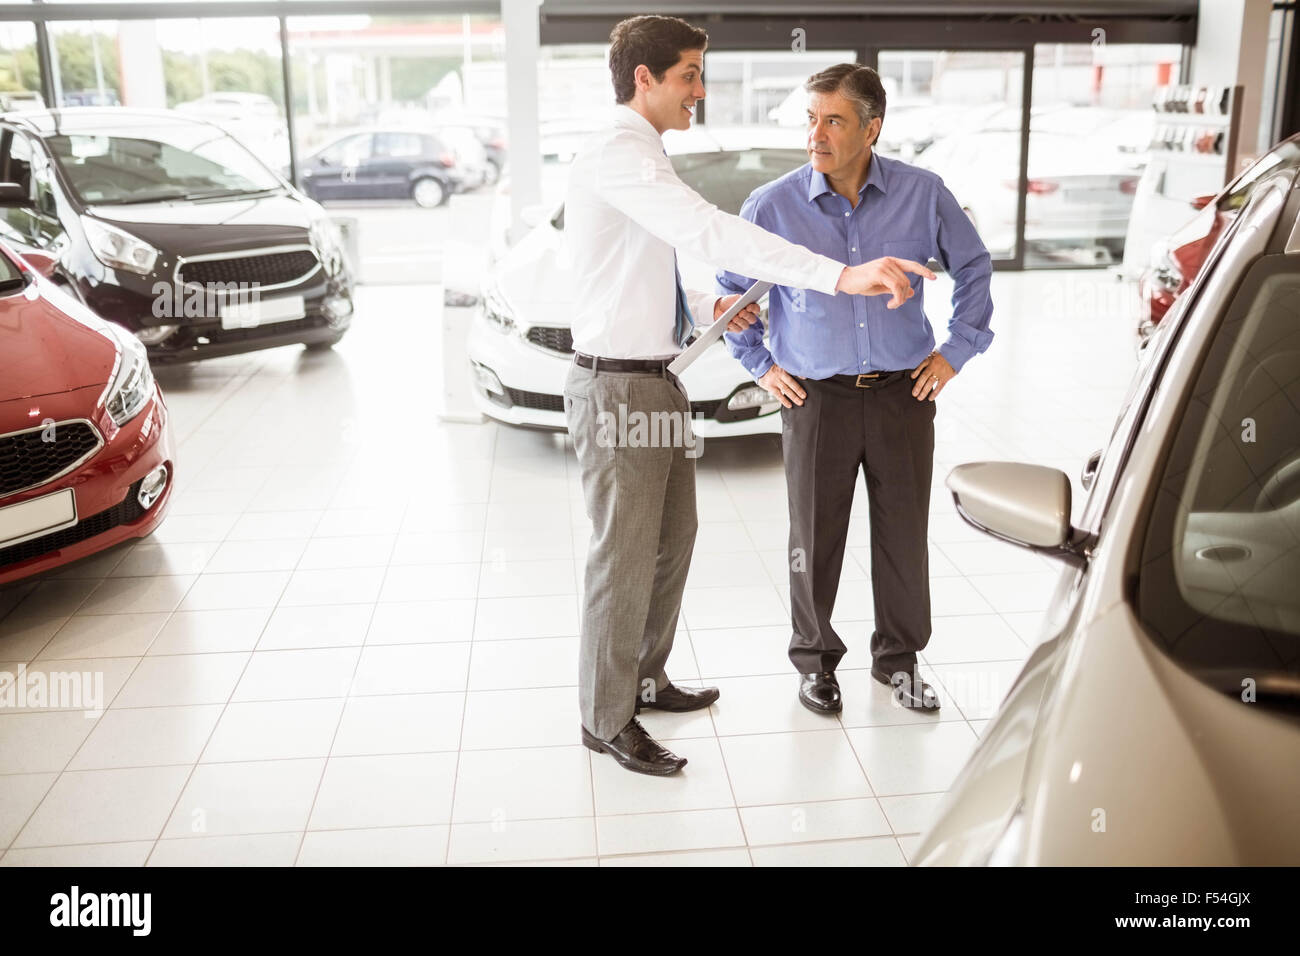 Salesman showing somethings to a man Stock Photo